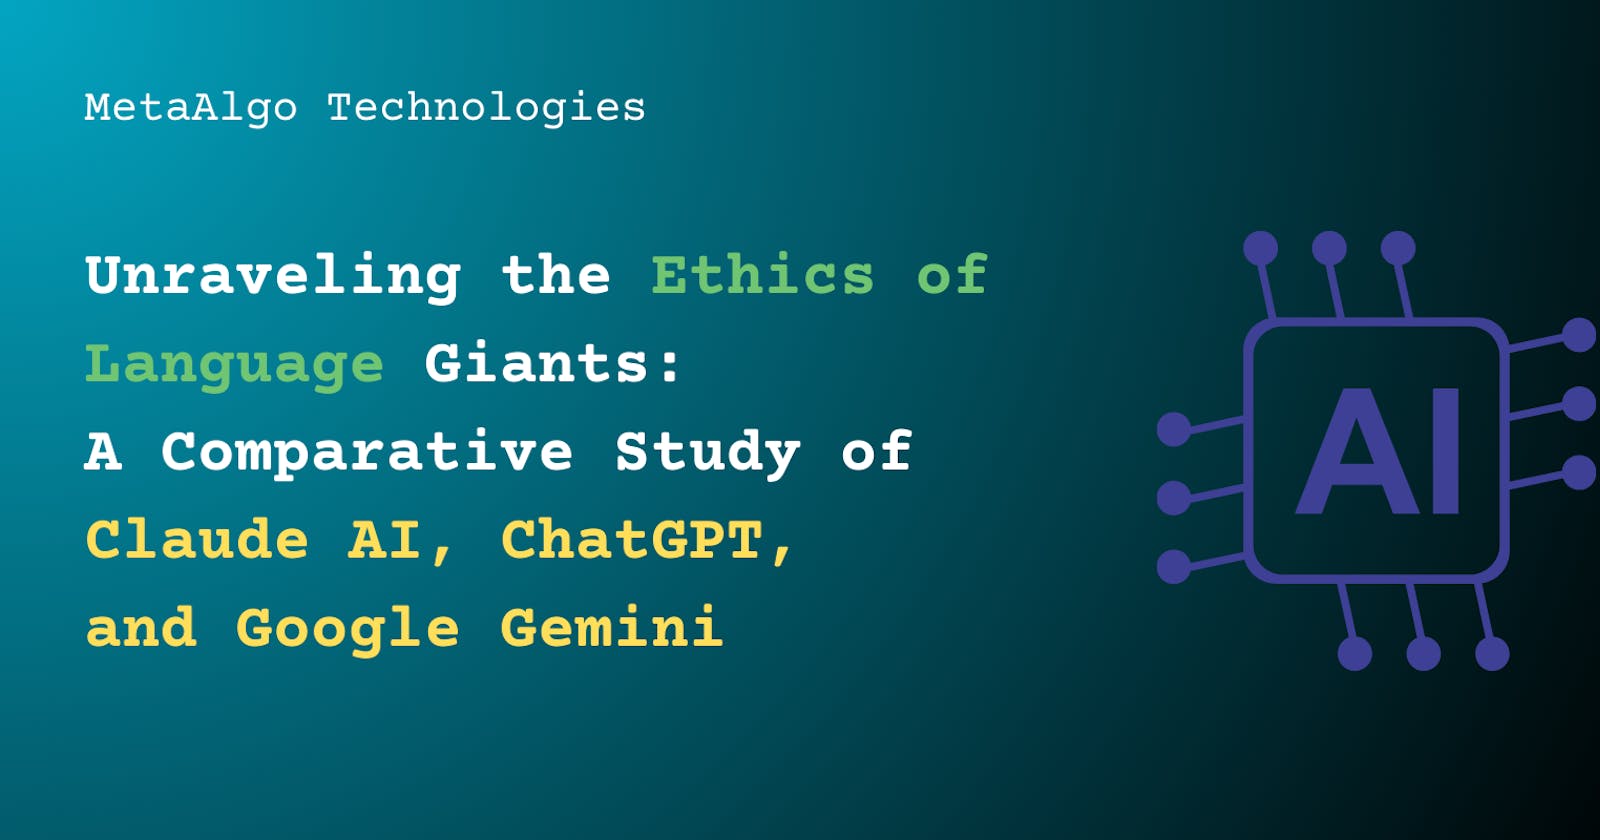 Unraveling the Ethics of Language Giants: A Comparative Study of Claude AI, ChatGPT, and Google Gemini